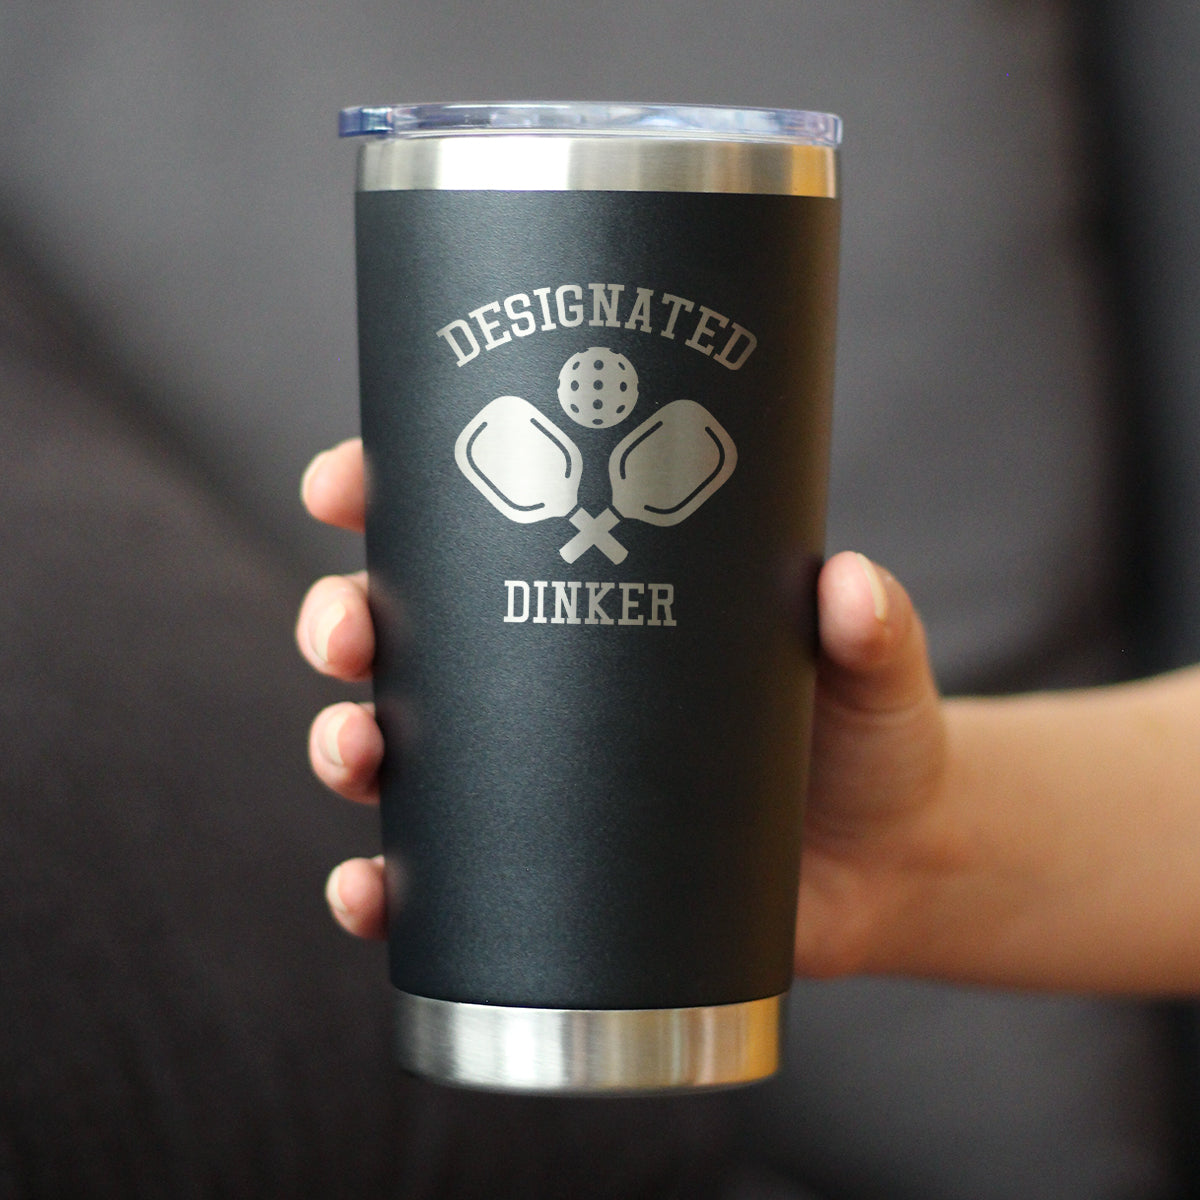 Designated Dinker - Insulated Coffee Tumbler Cup with Sliding Lid - Stainless Steel Insulated Mug - Funny Pickleball Themed Gifts and Decor